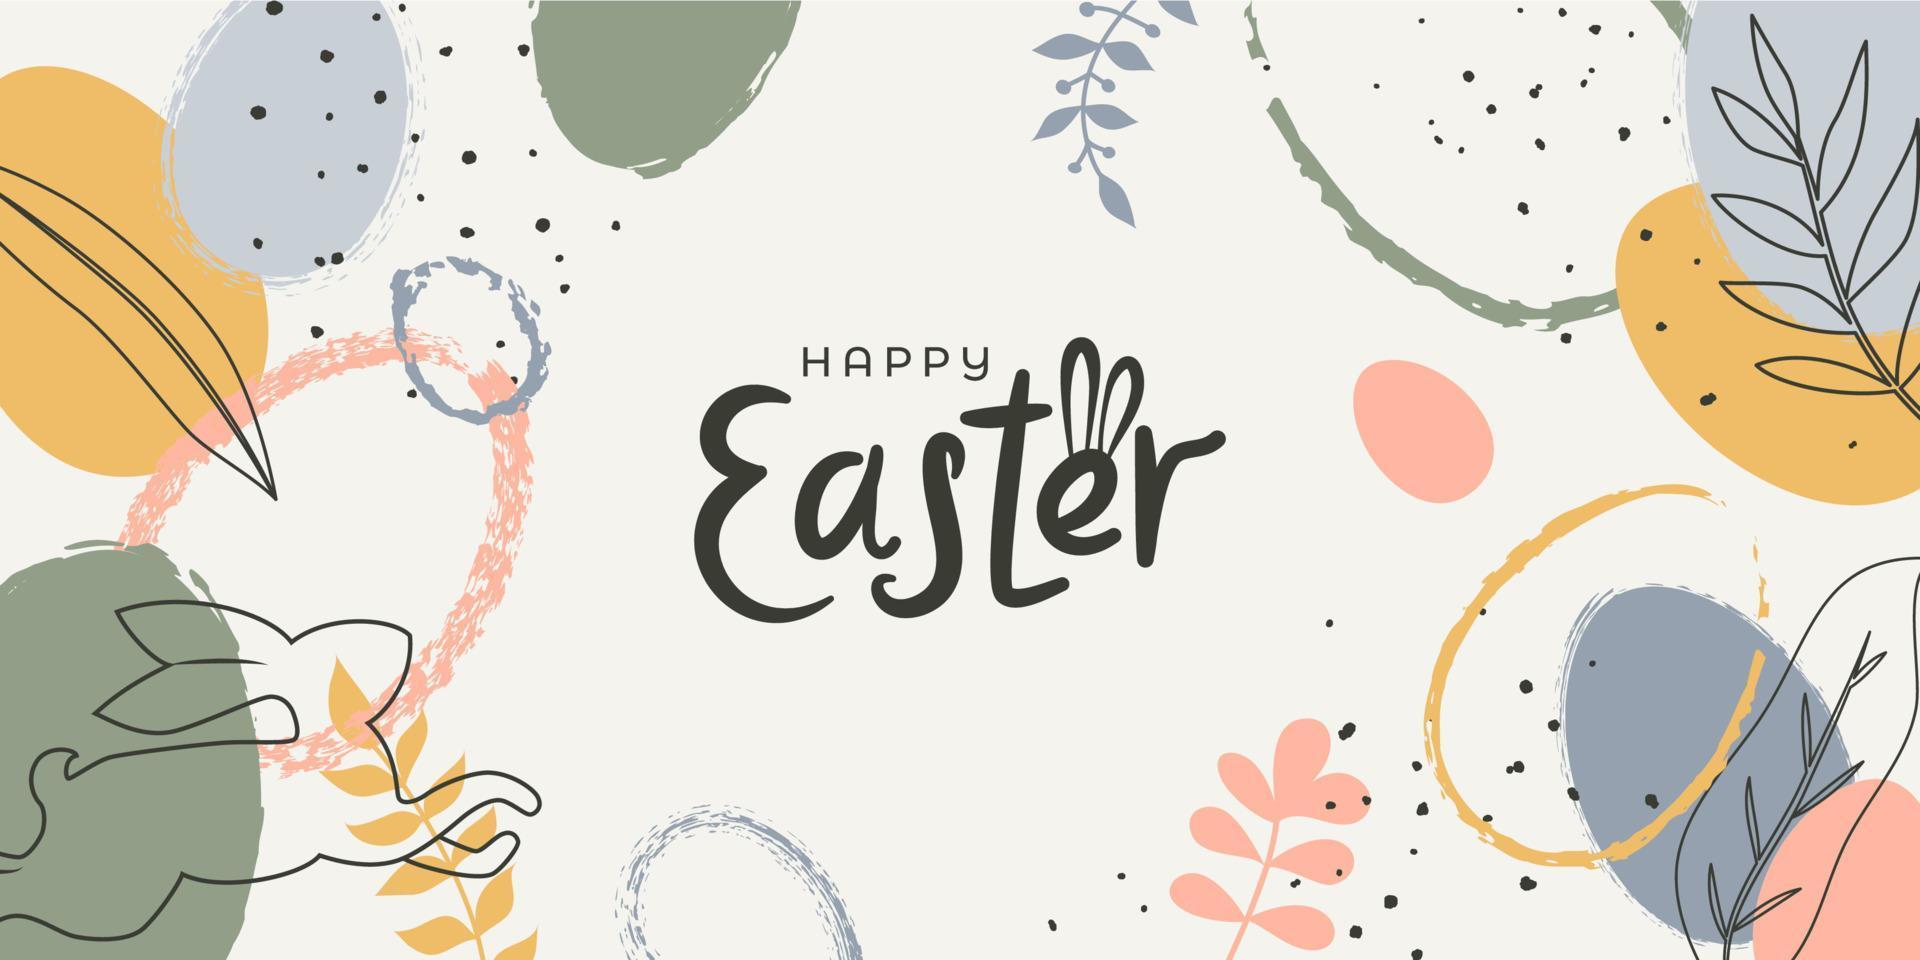 Hand drawn Easter decorations with flower decorations in pastel colors. Minimalist style design with eggs and plants vector